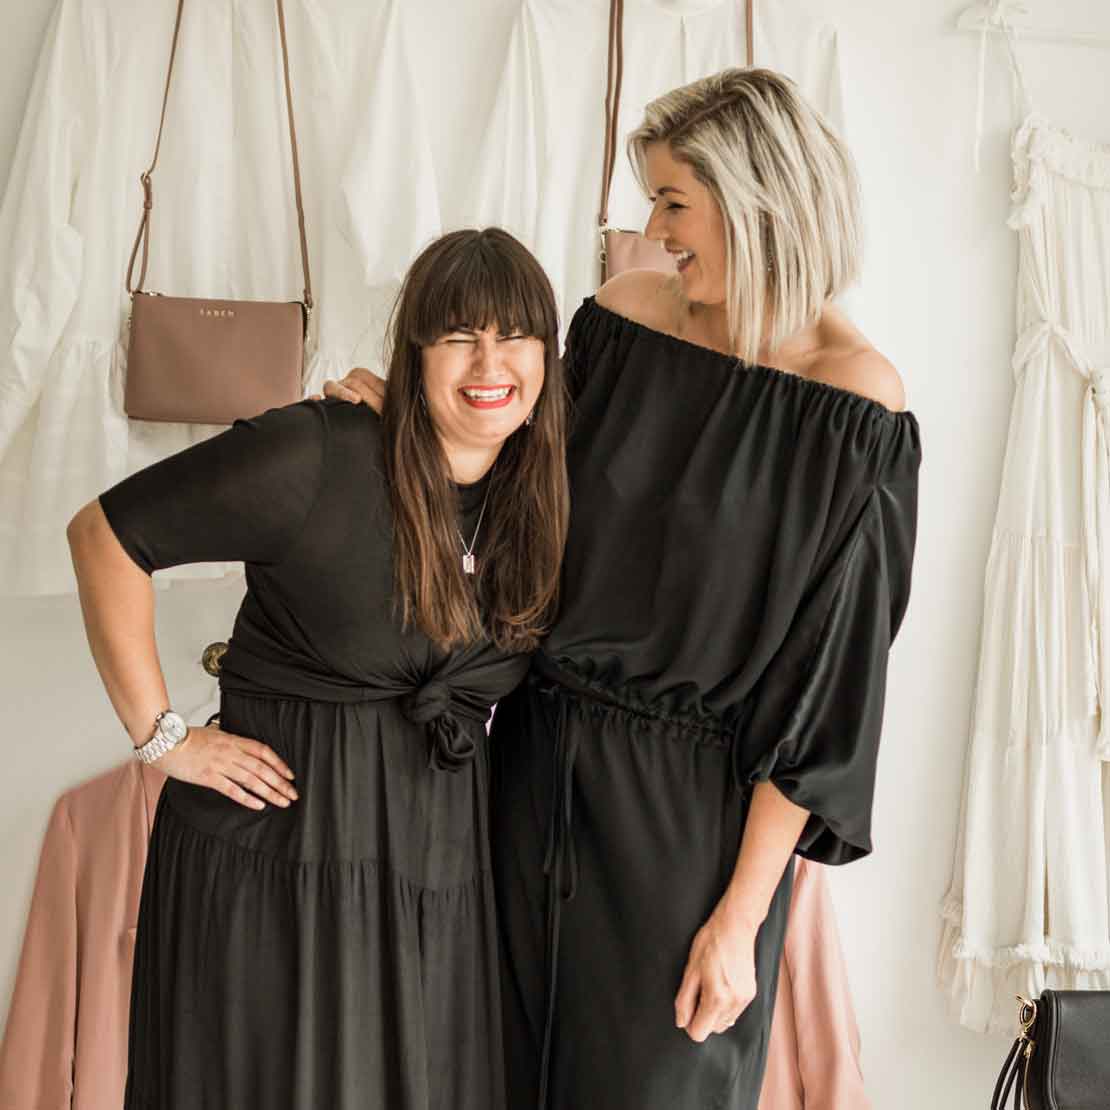 BAZAAR THE EMPIRE | Q&A with Nardine and Hayley